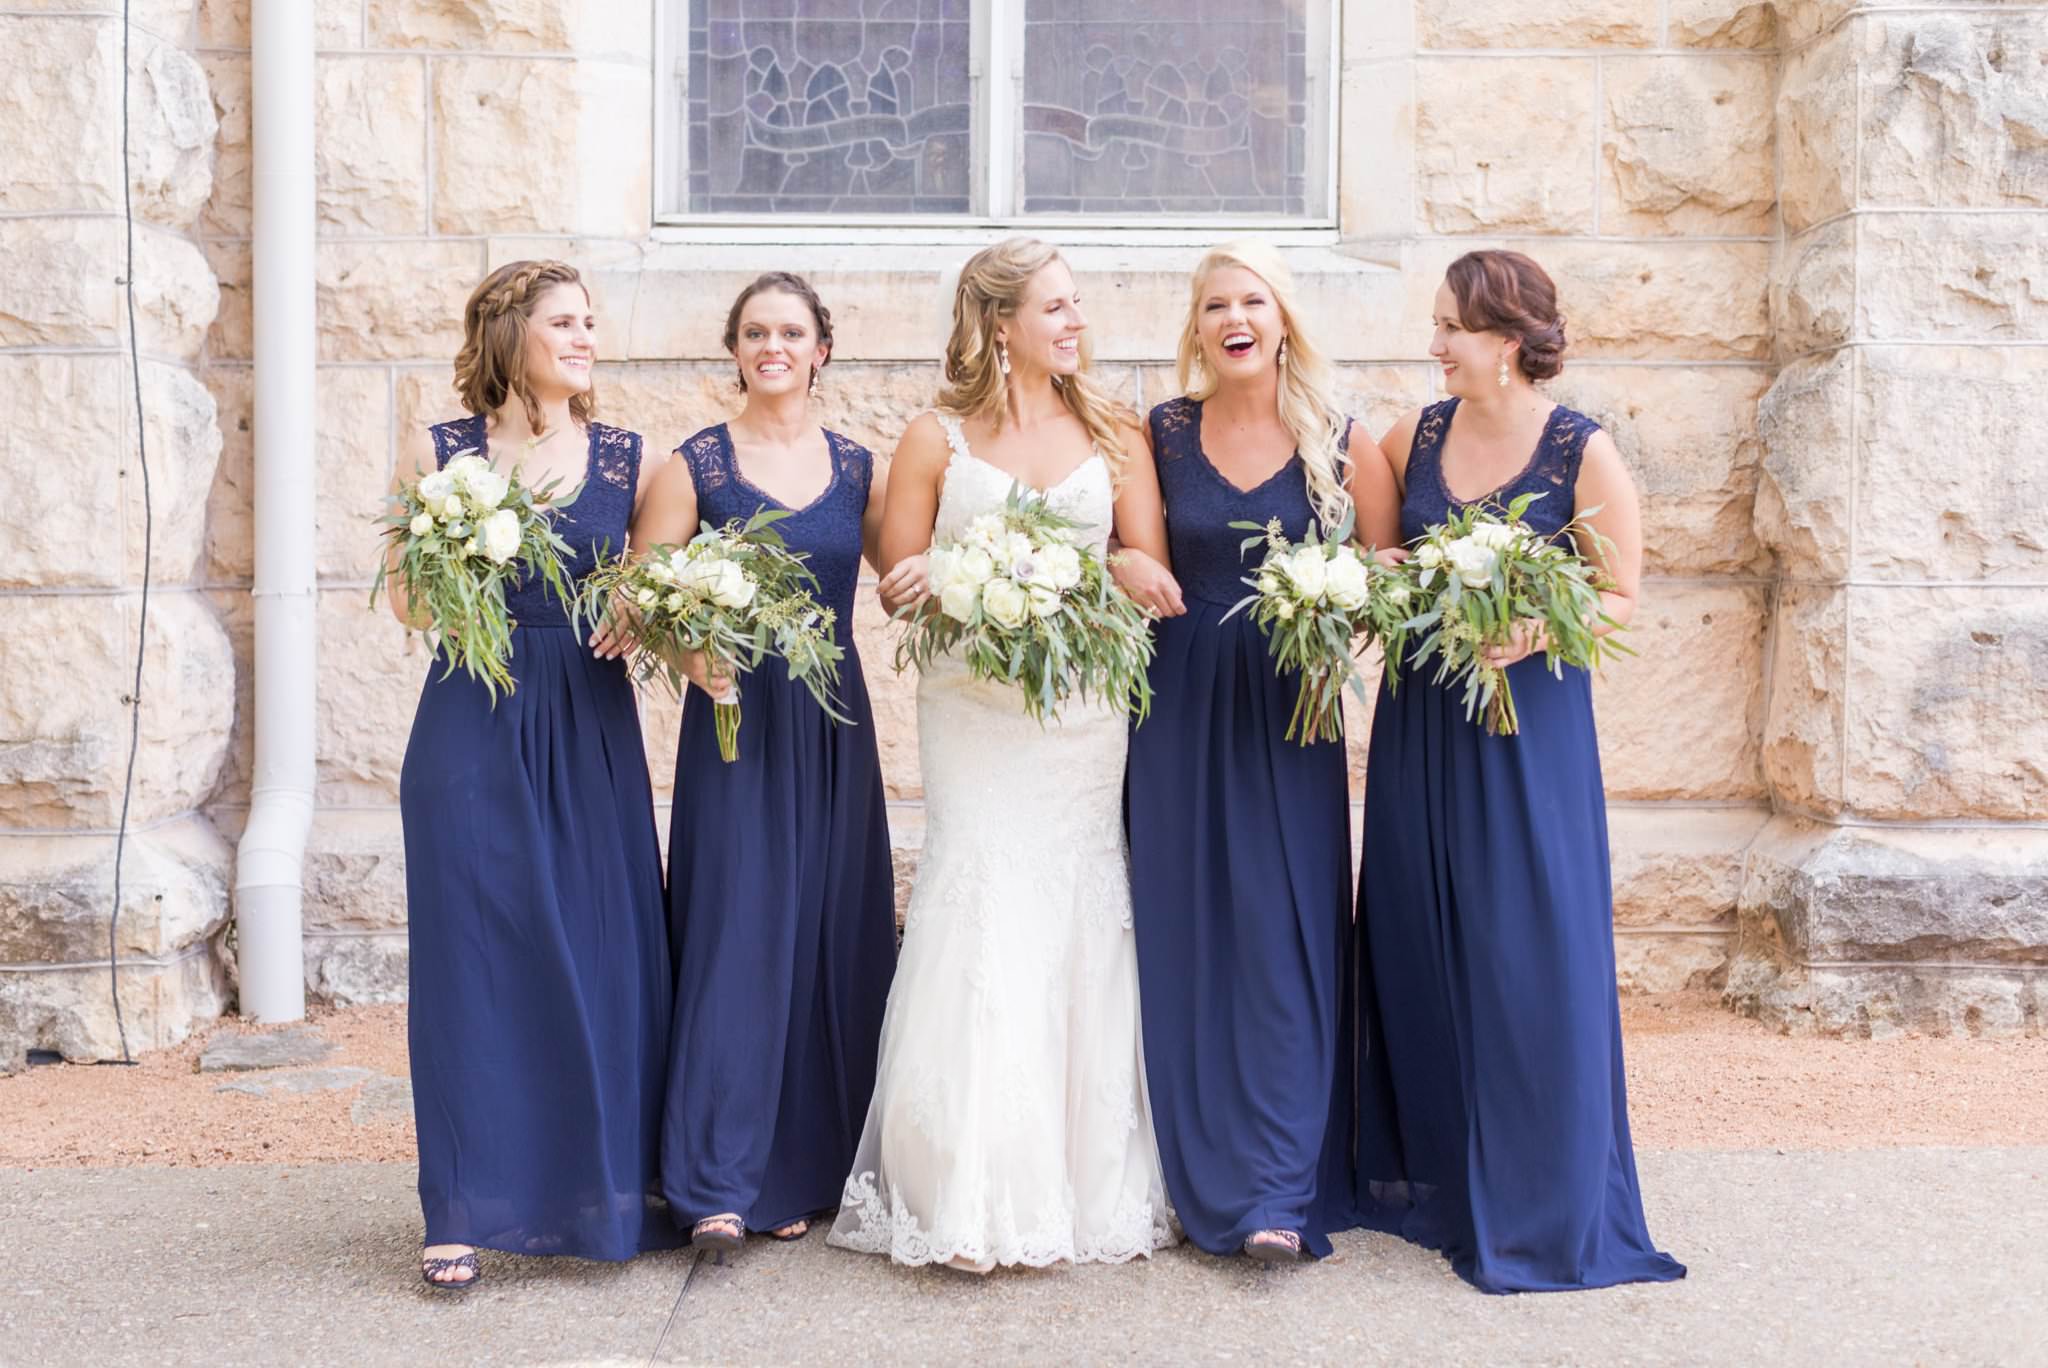 A Grey and Navy Wedding at the Lodge at Country Inn Cottages in Fredericksburg, TX by Dawn Elizabeth Studios, Fredericksburg Wedding Photographer